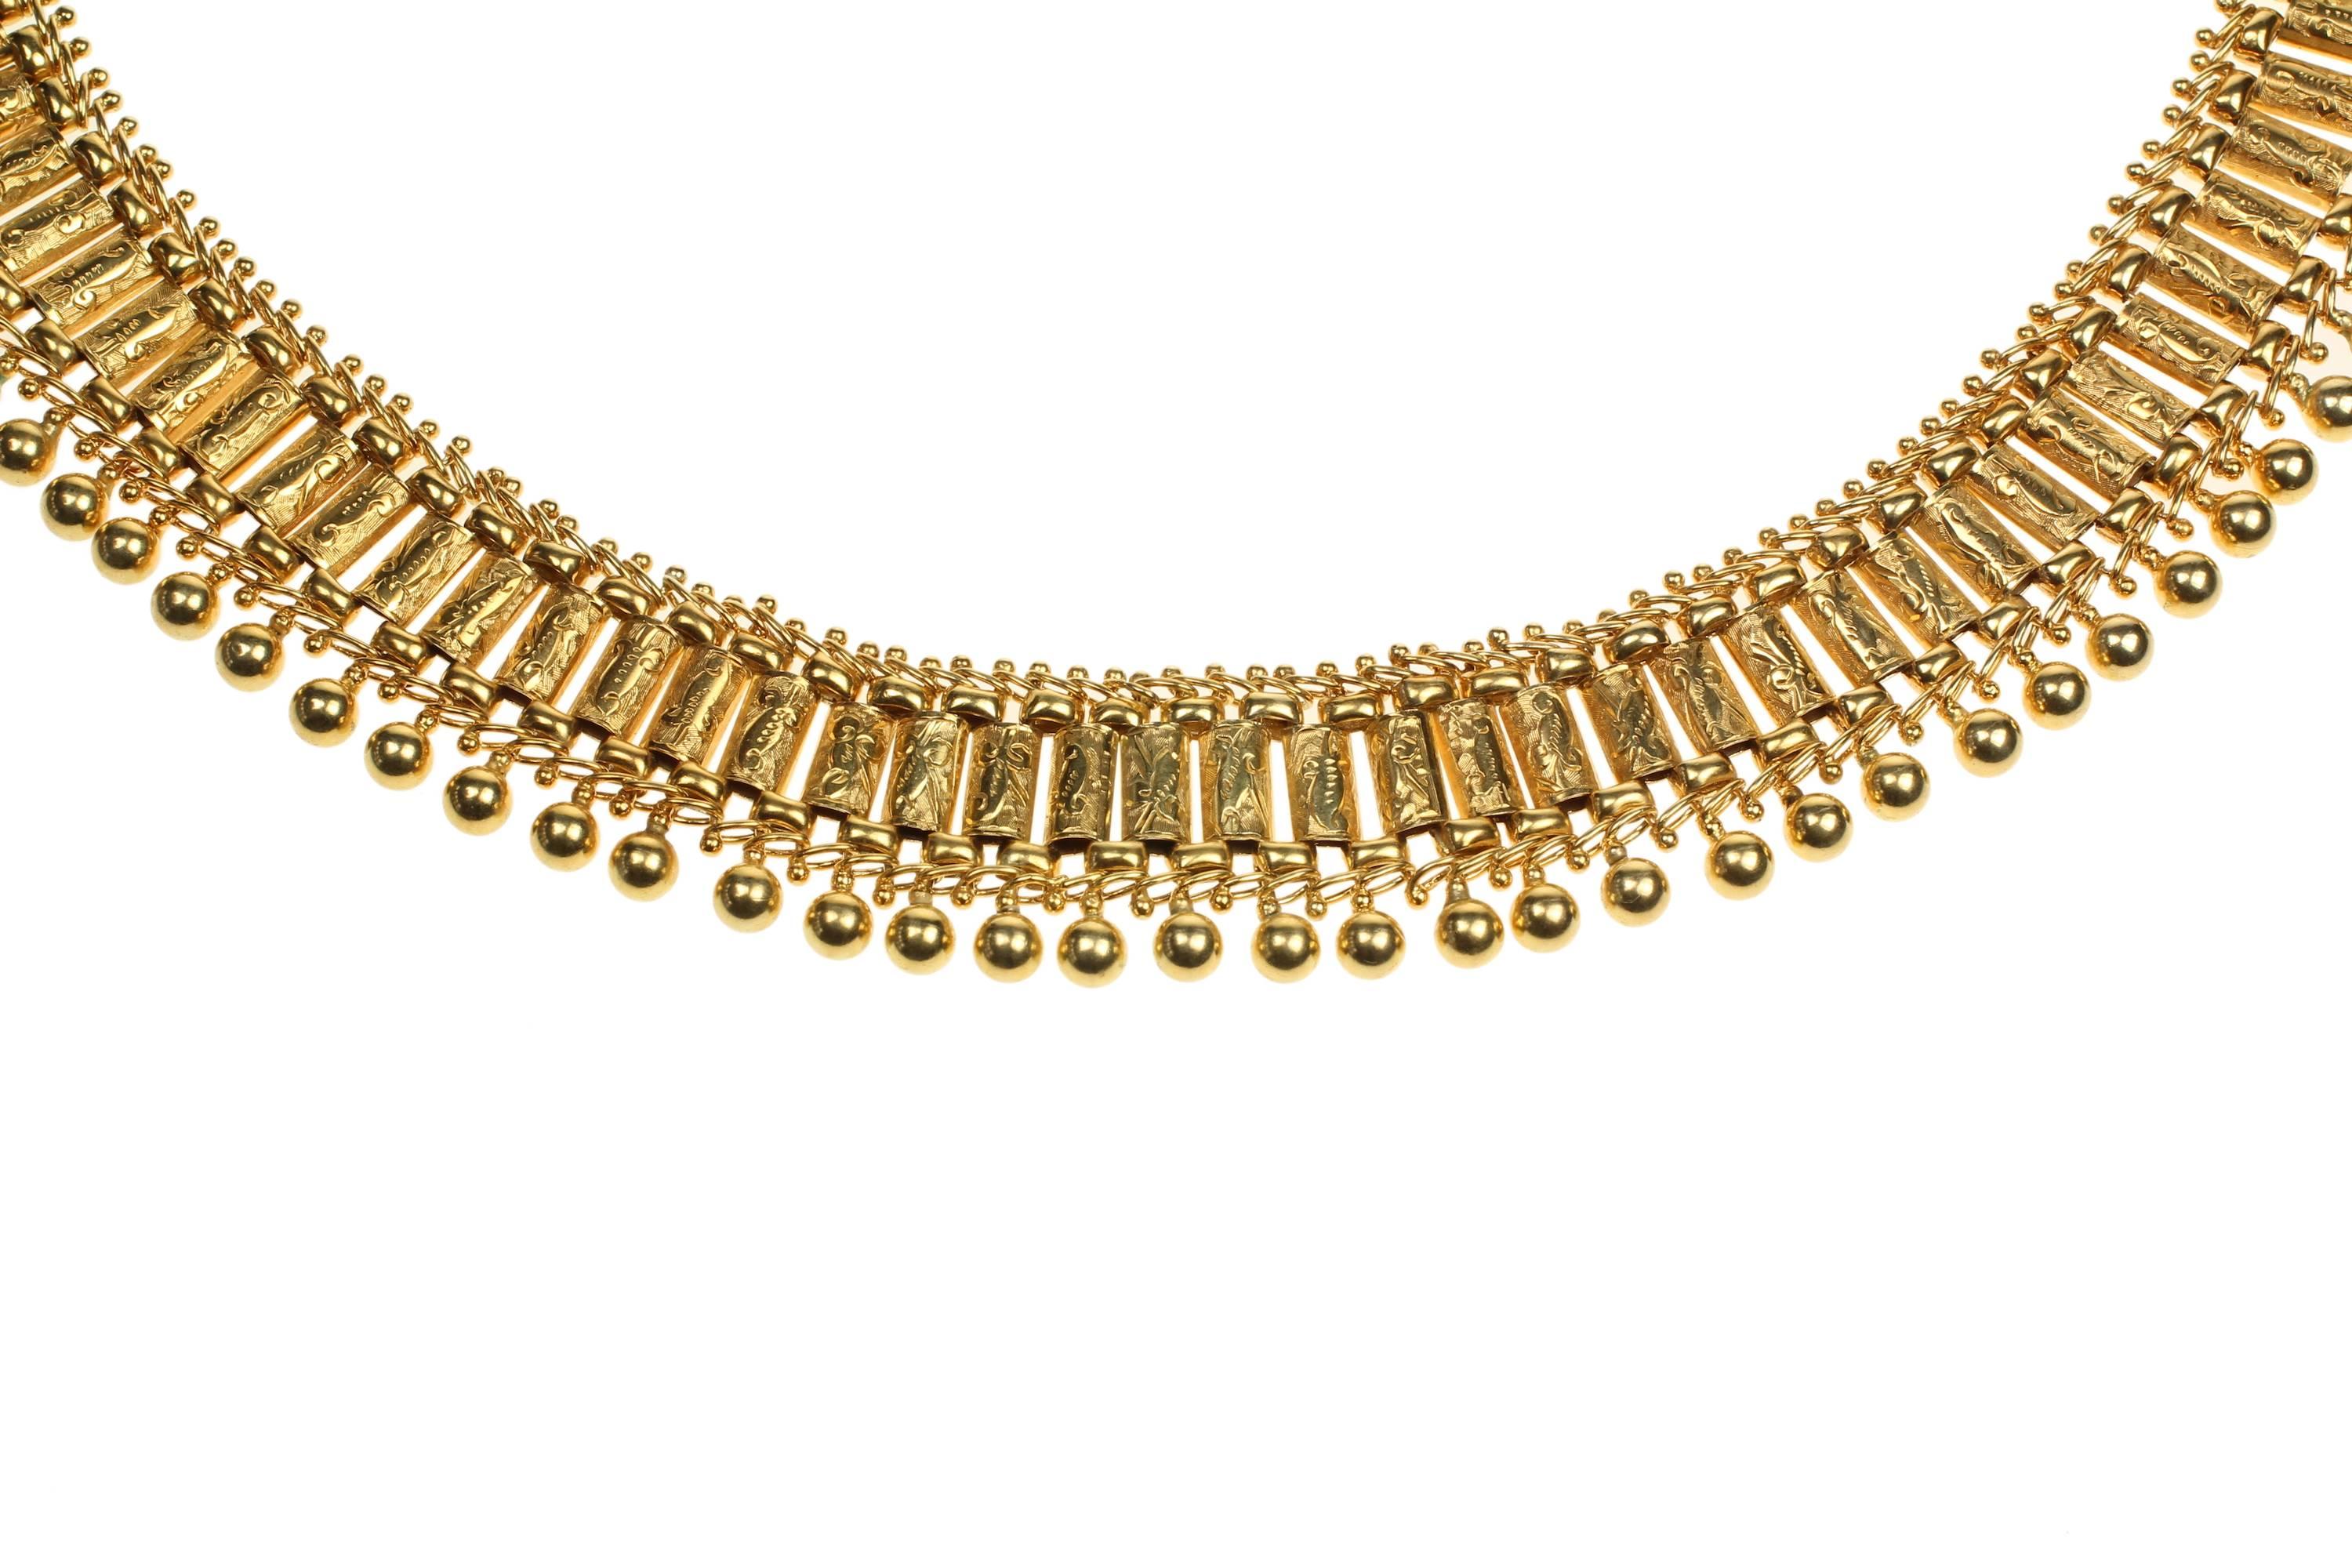 Silver Gilt Etruscan Style Collar Choker Necklace In Excellent Condition For Sale In London, GB